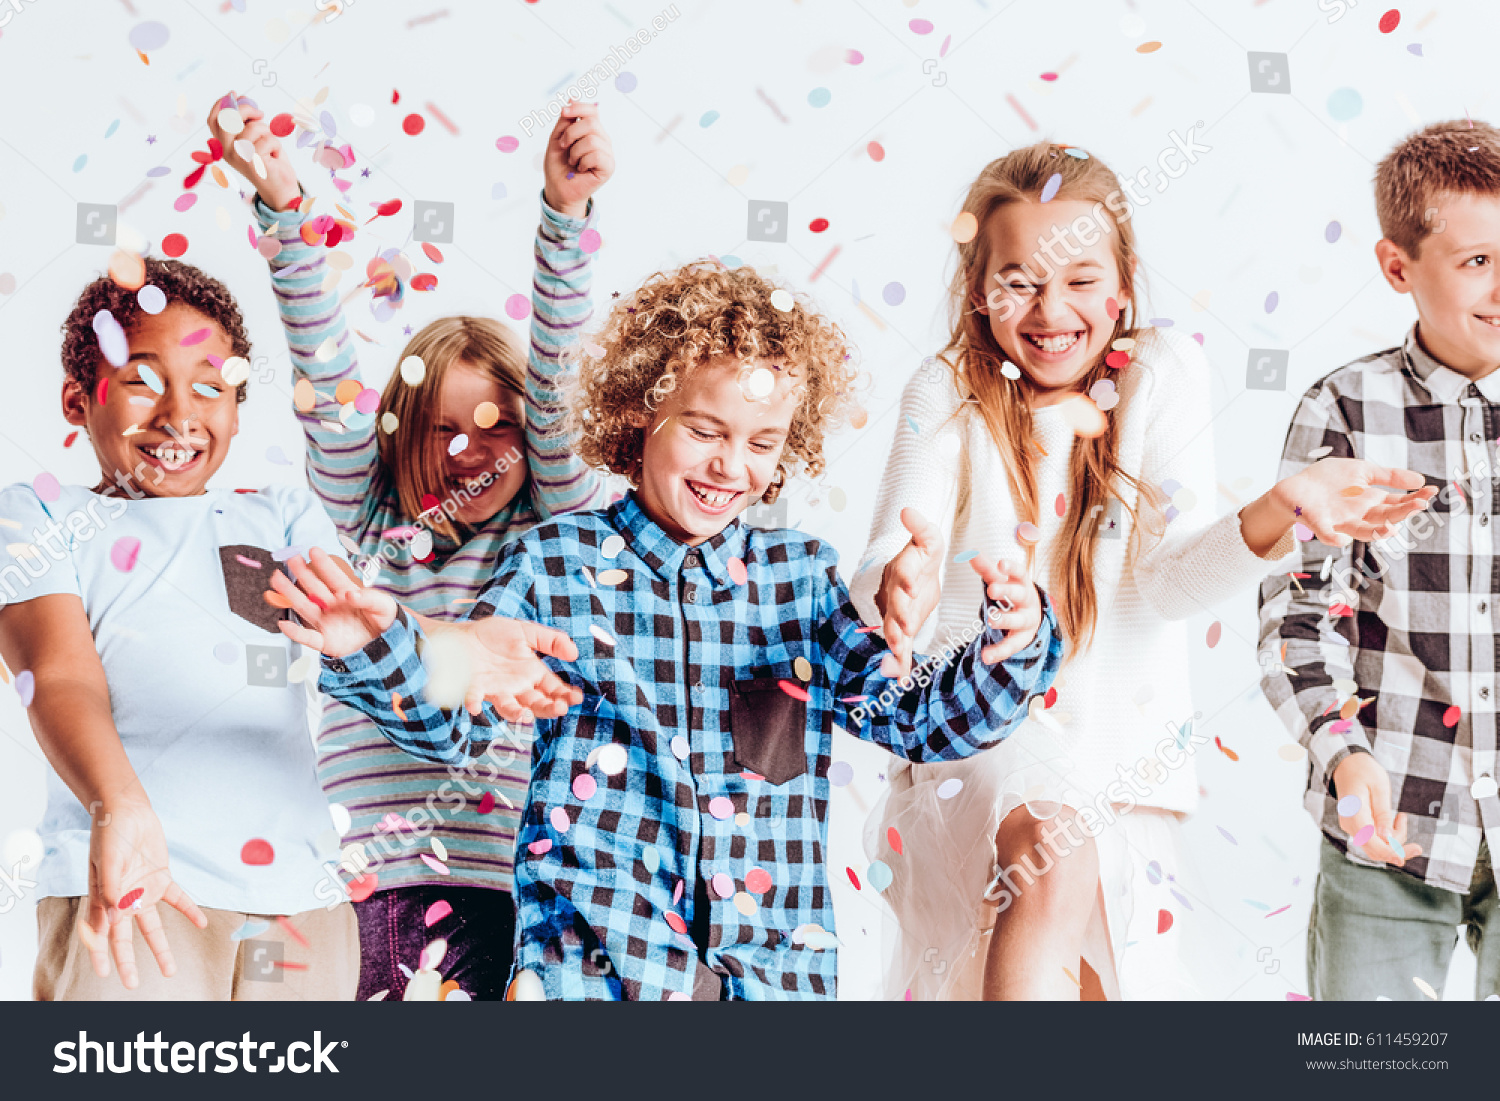 Happy kids throwing colorful confetti in a room #611459207